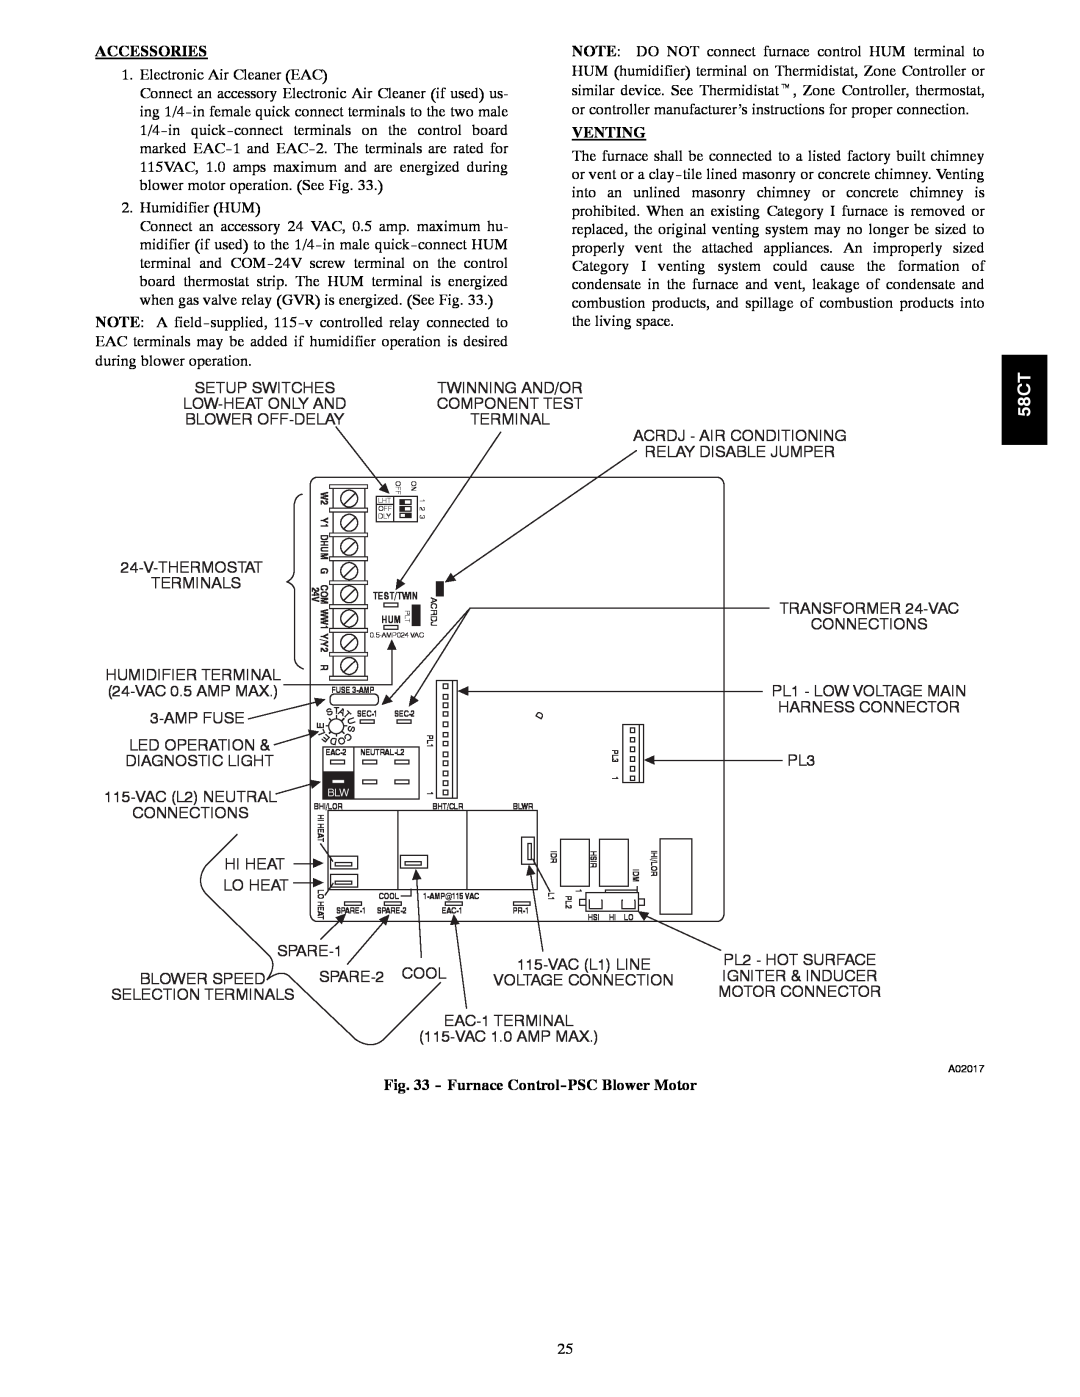 Carrier 58CTA/CTX instruction manual Accessories, Venting, Furnace Control-PSCBlower Motor 